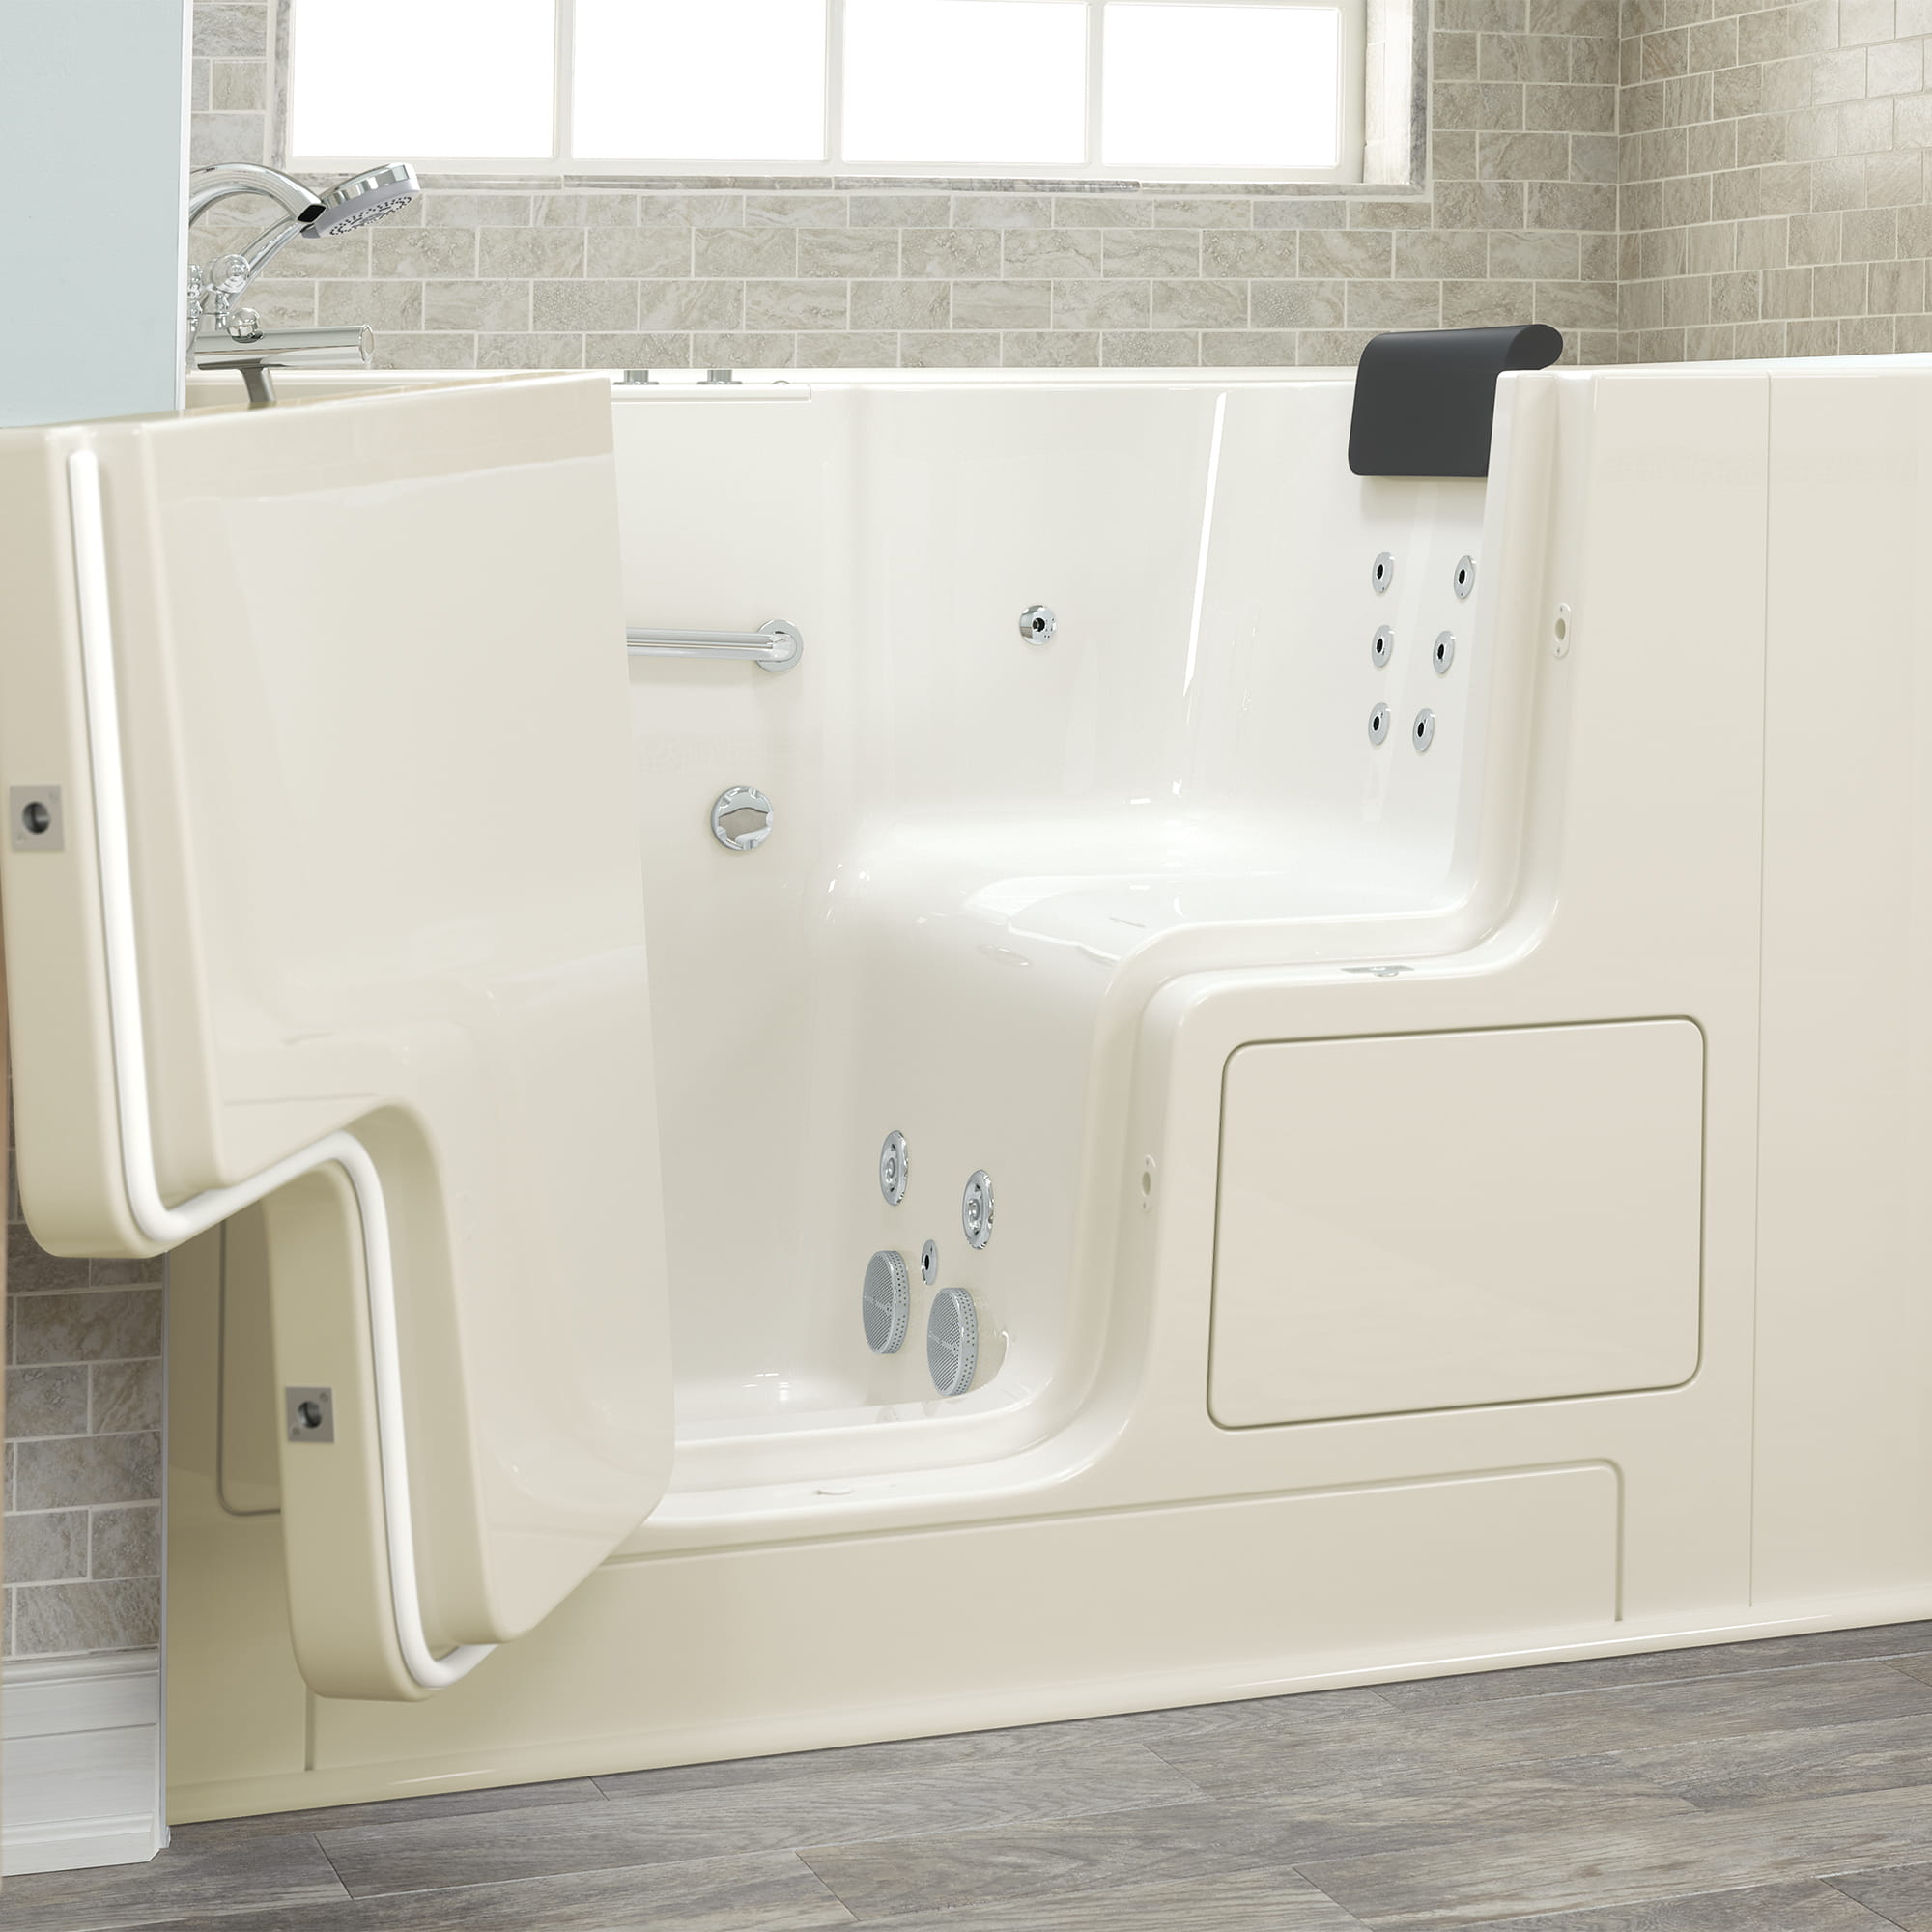 Gelcoat Premium Series 32 x 52 -Inch Walk-in Tub With Whirlpool System - Left-Hand Drain With Faucet